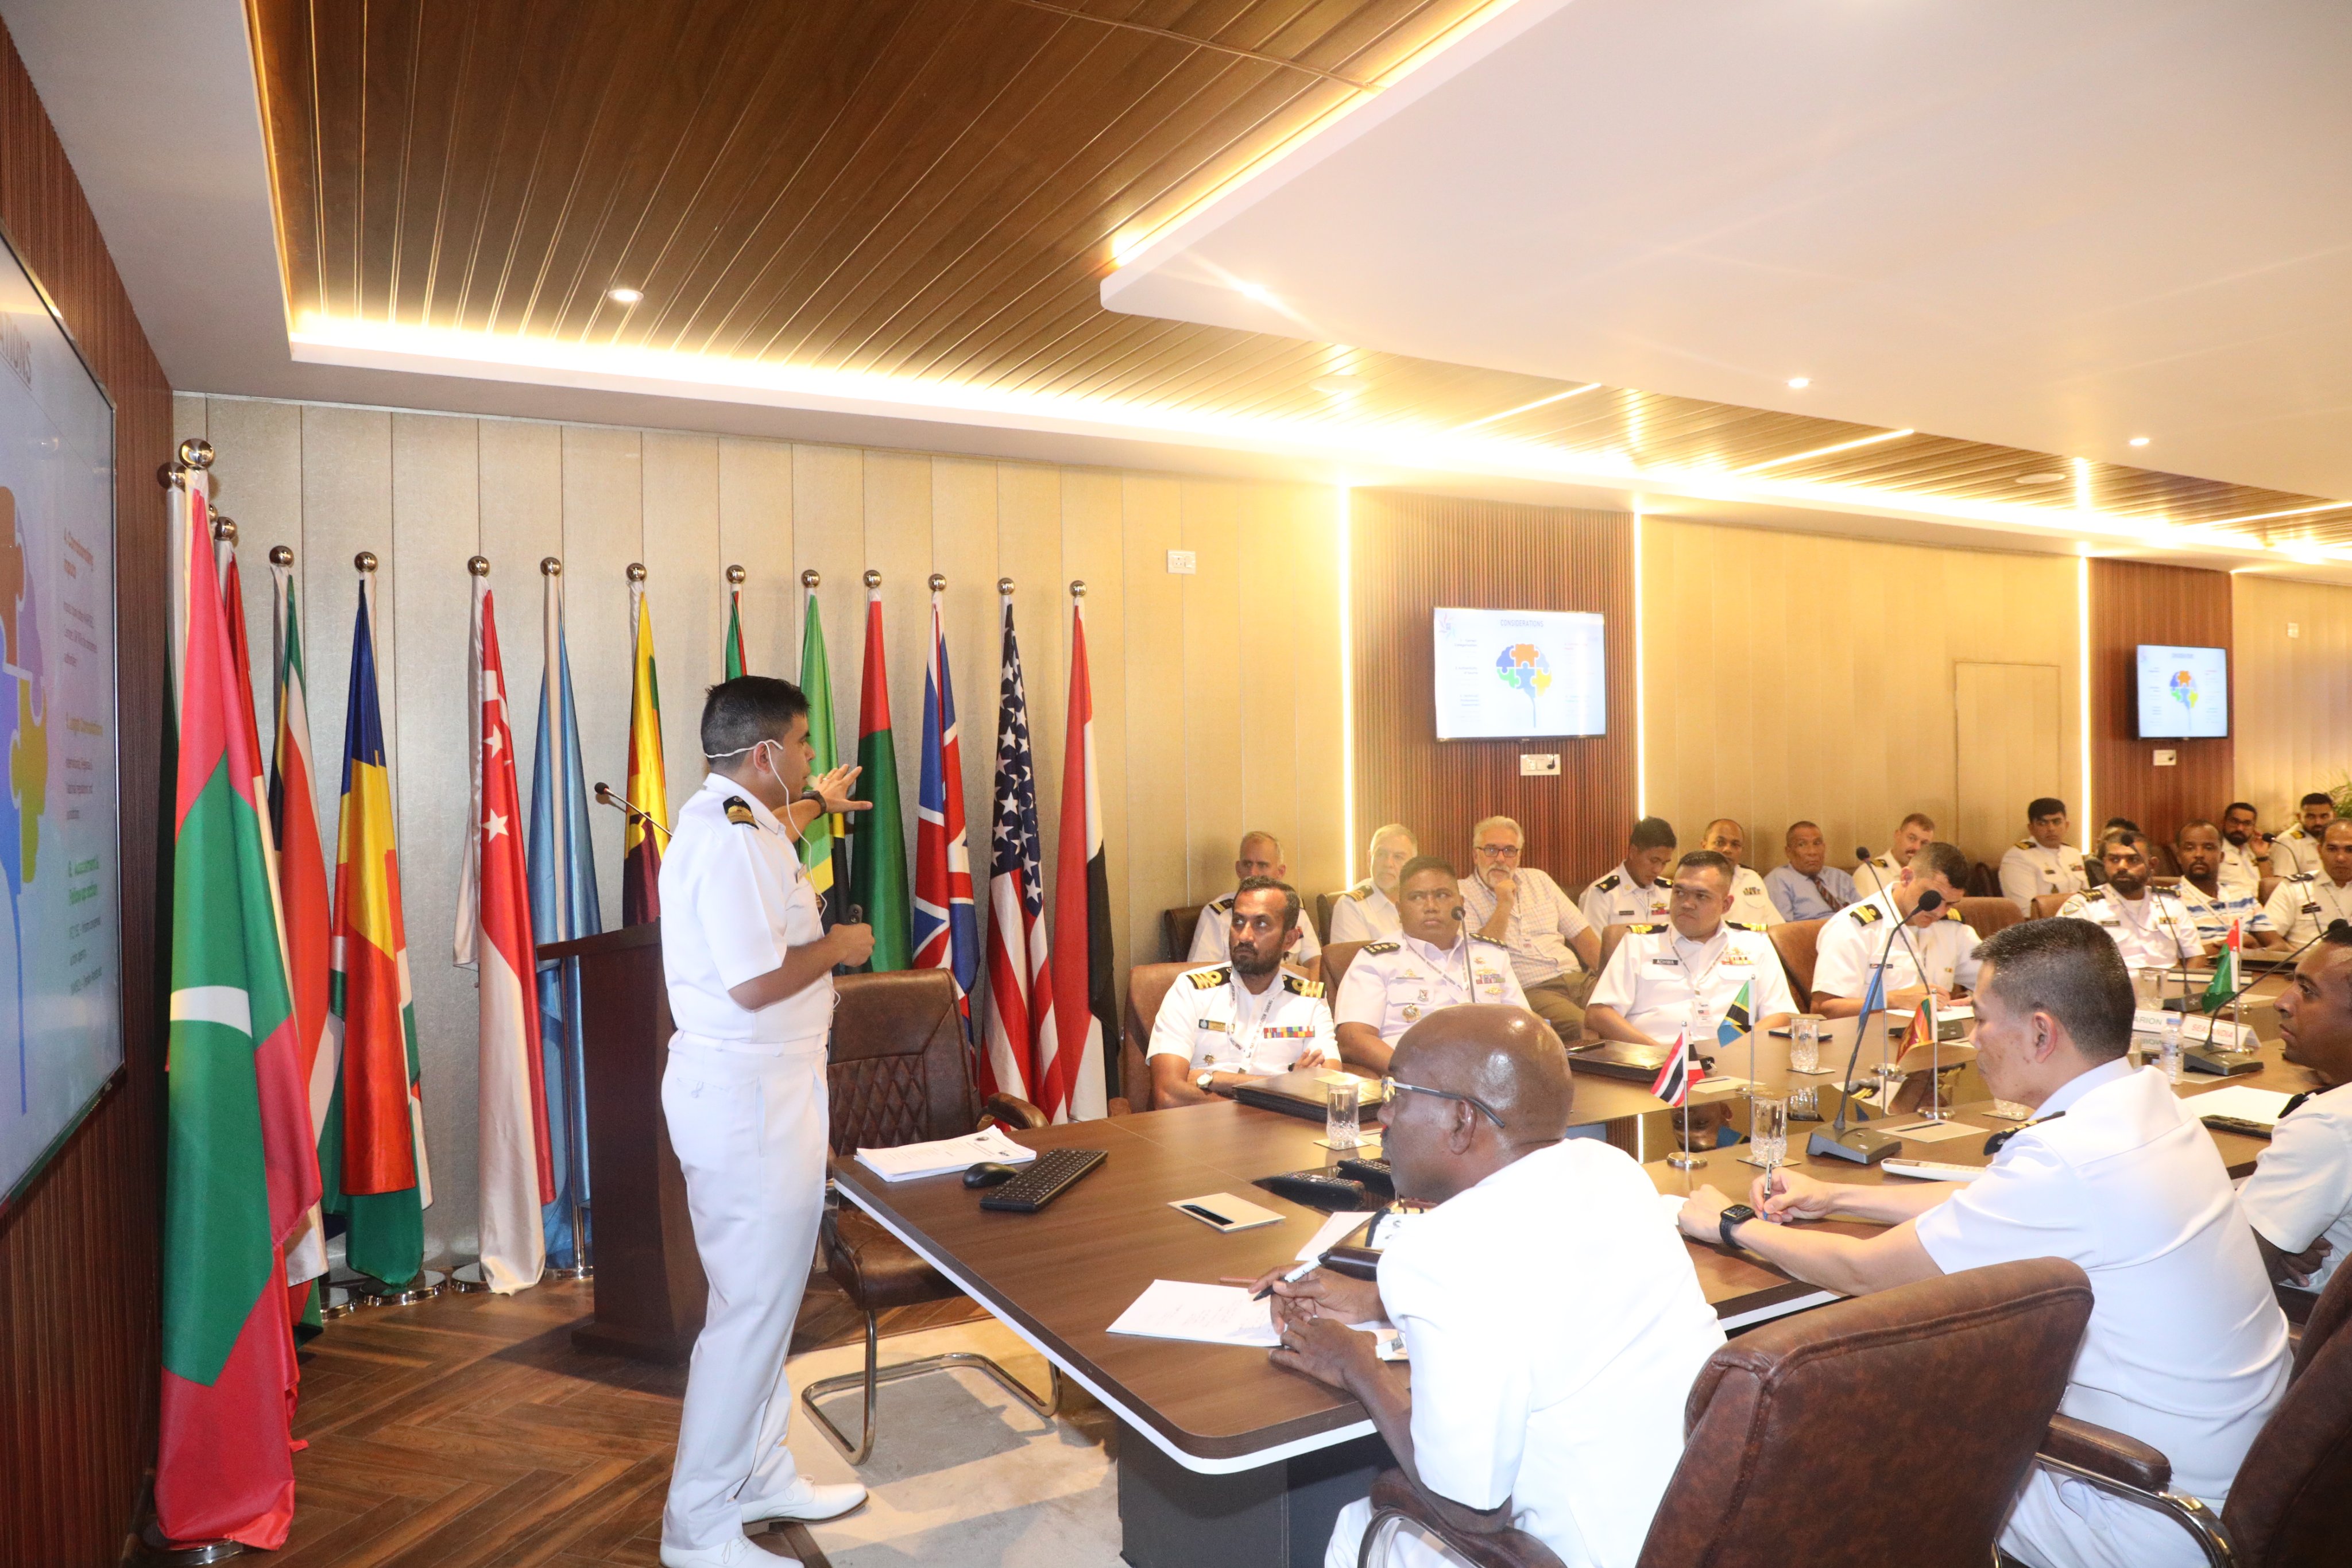 Maritime Information Sharing Workshop (MISW-23), hosted by IFC-IOR from 14 - 16 Sep 2023 for IORA and DCoC-JA member countries